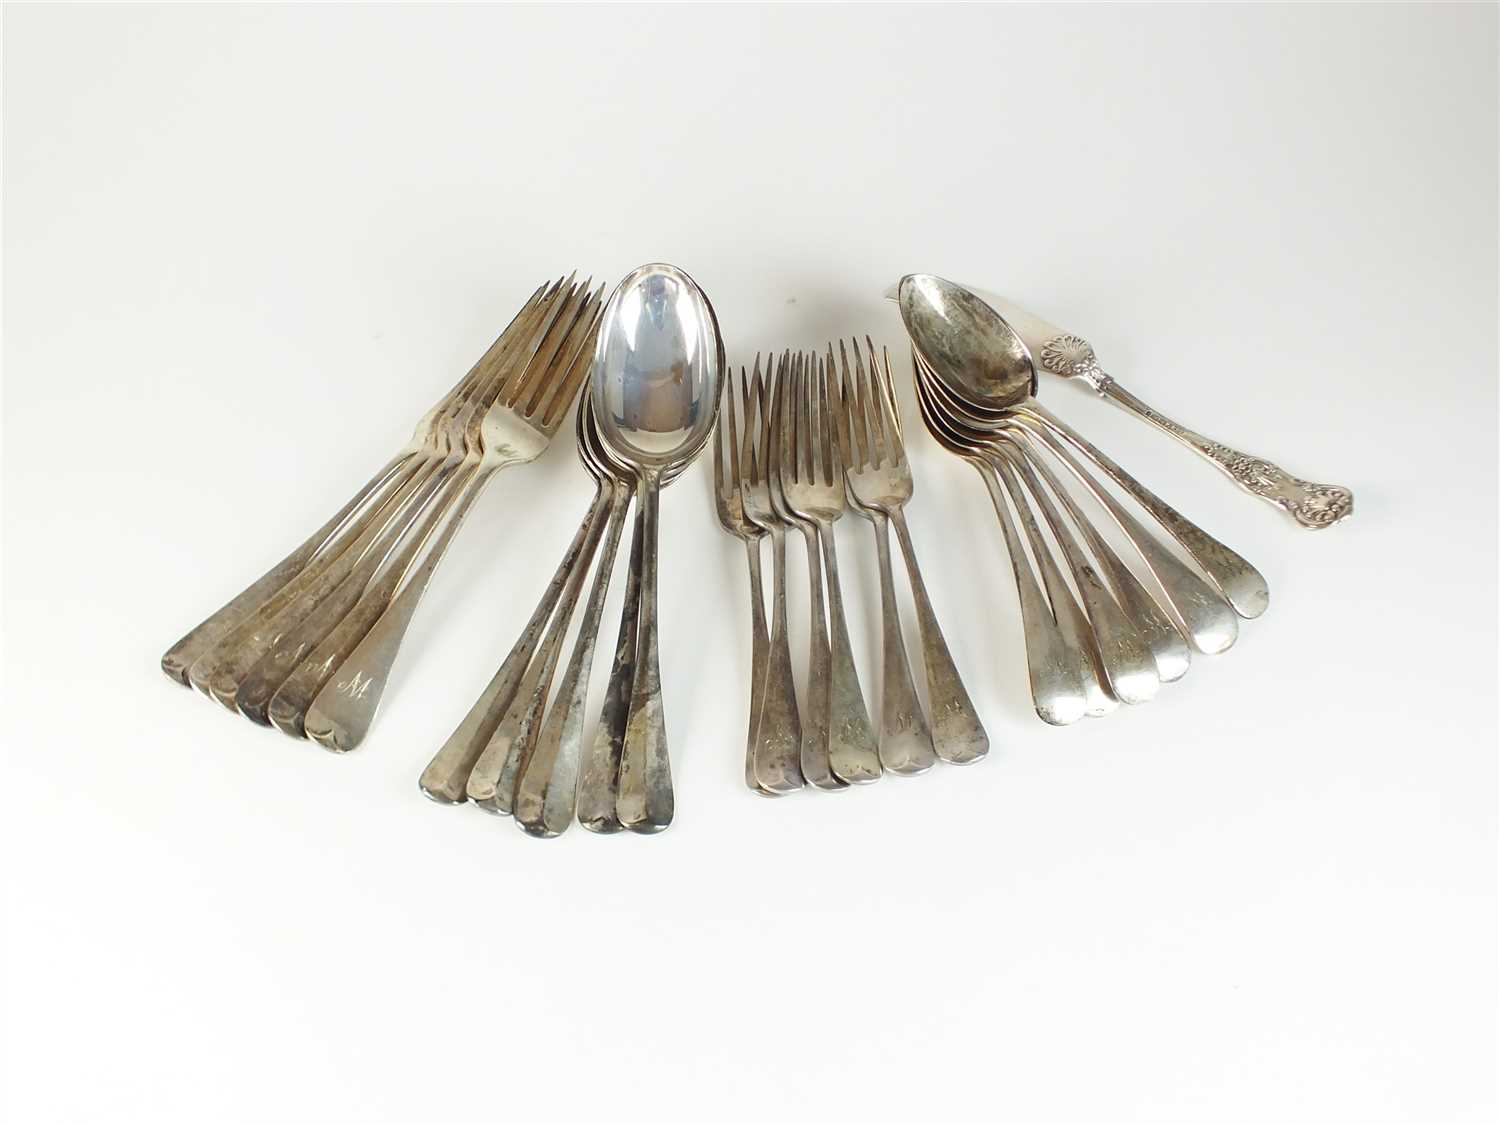 A part set of Old English pattern silver flatware